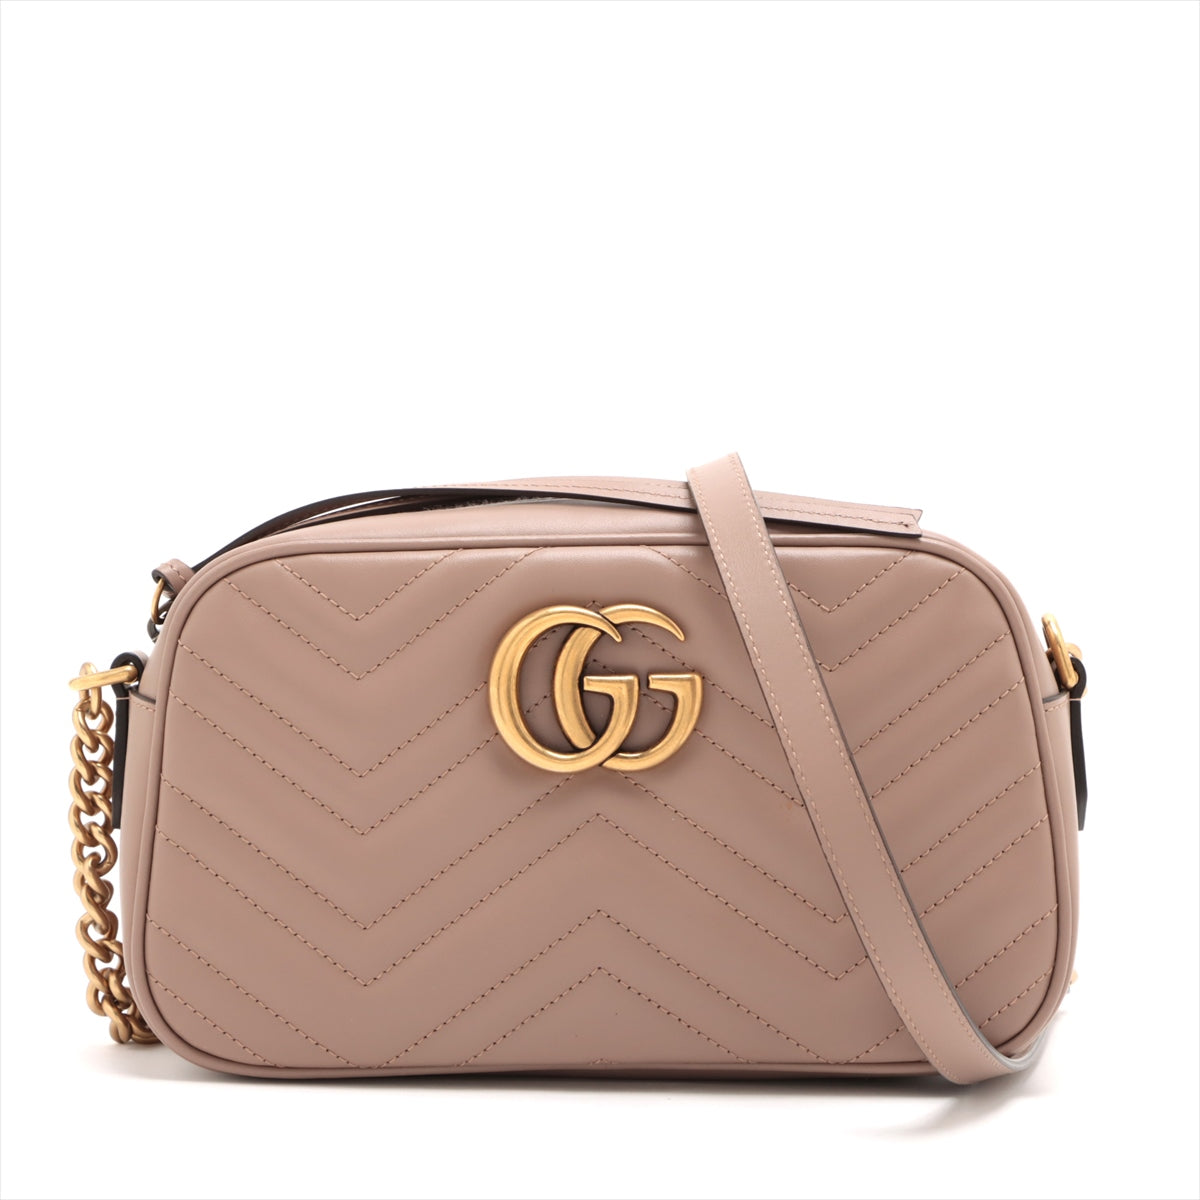 Gucci GG Marmont Leather Chain Shoulder Bag Beige 447632